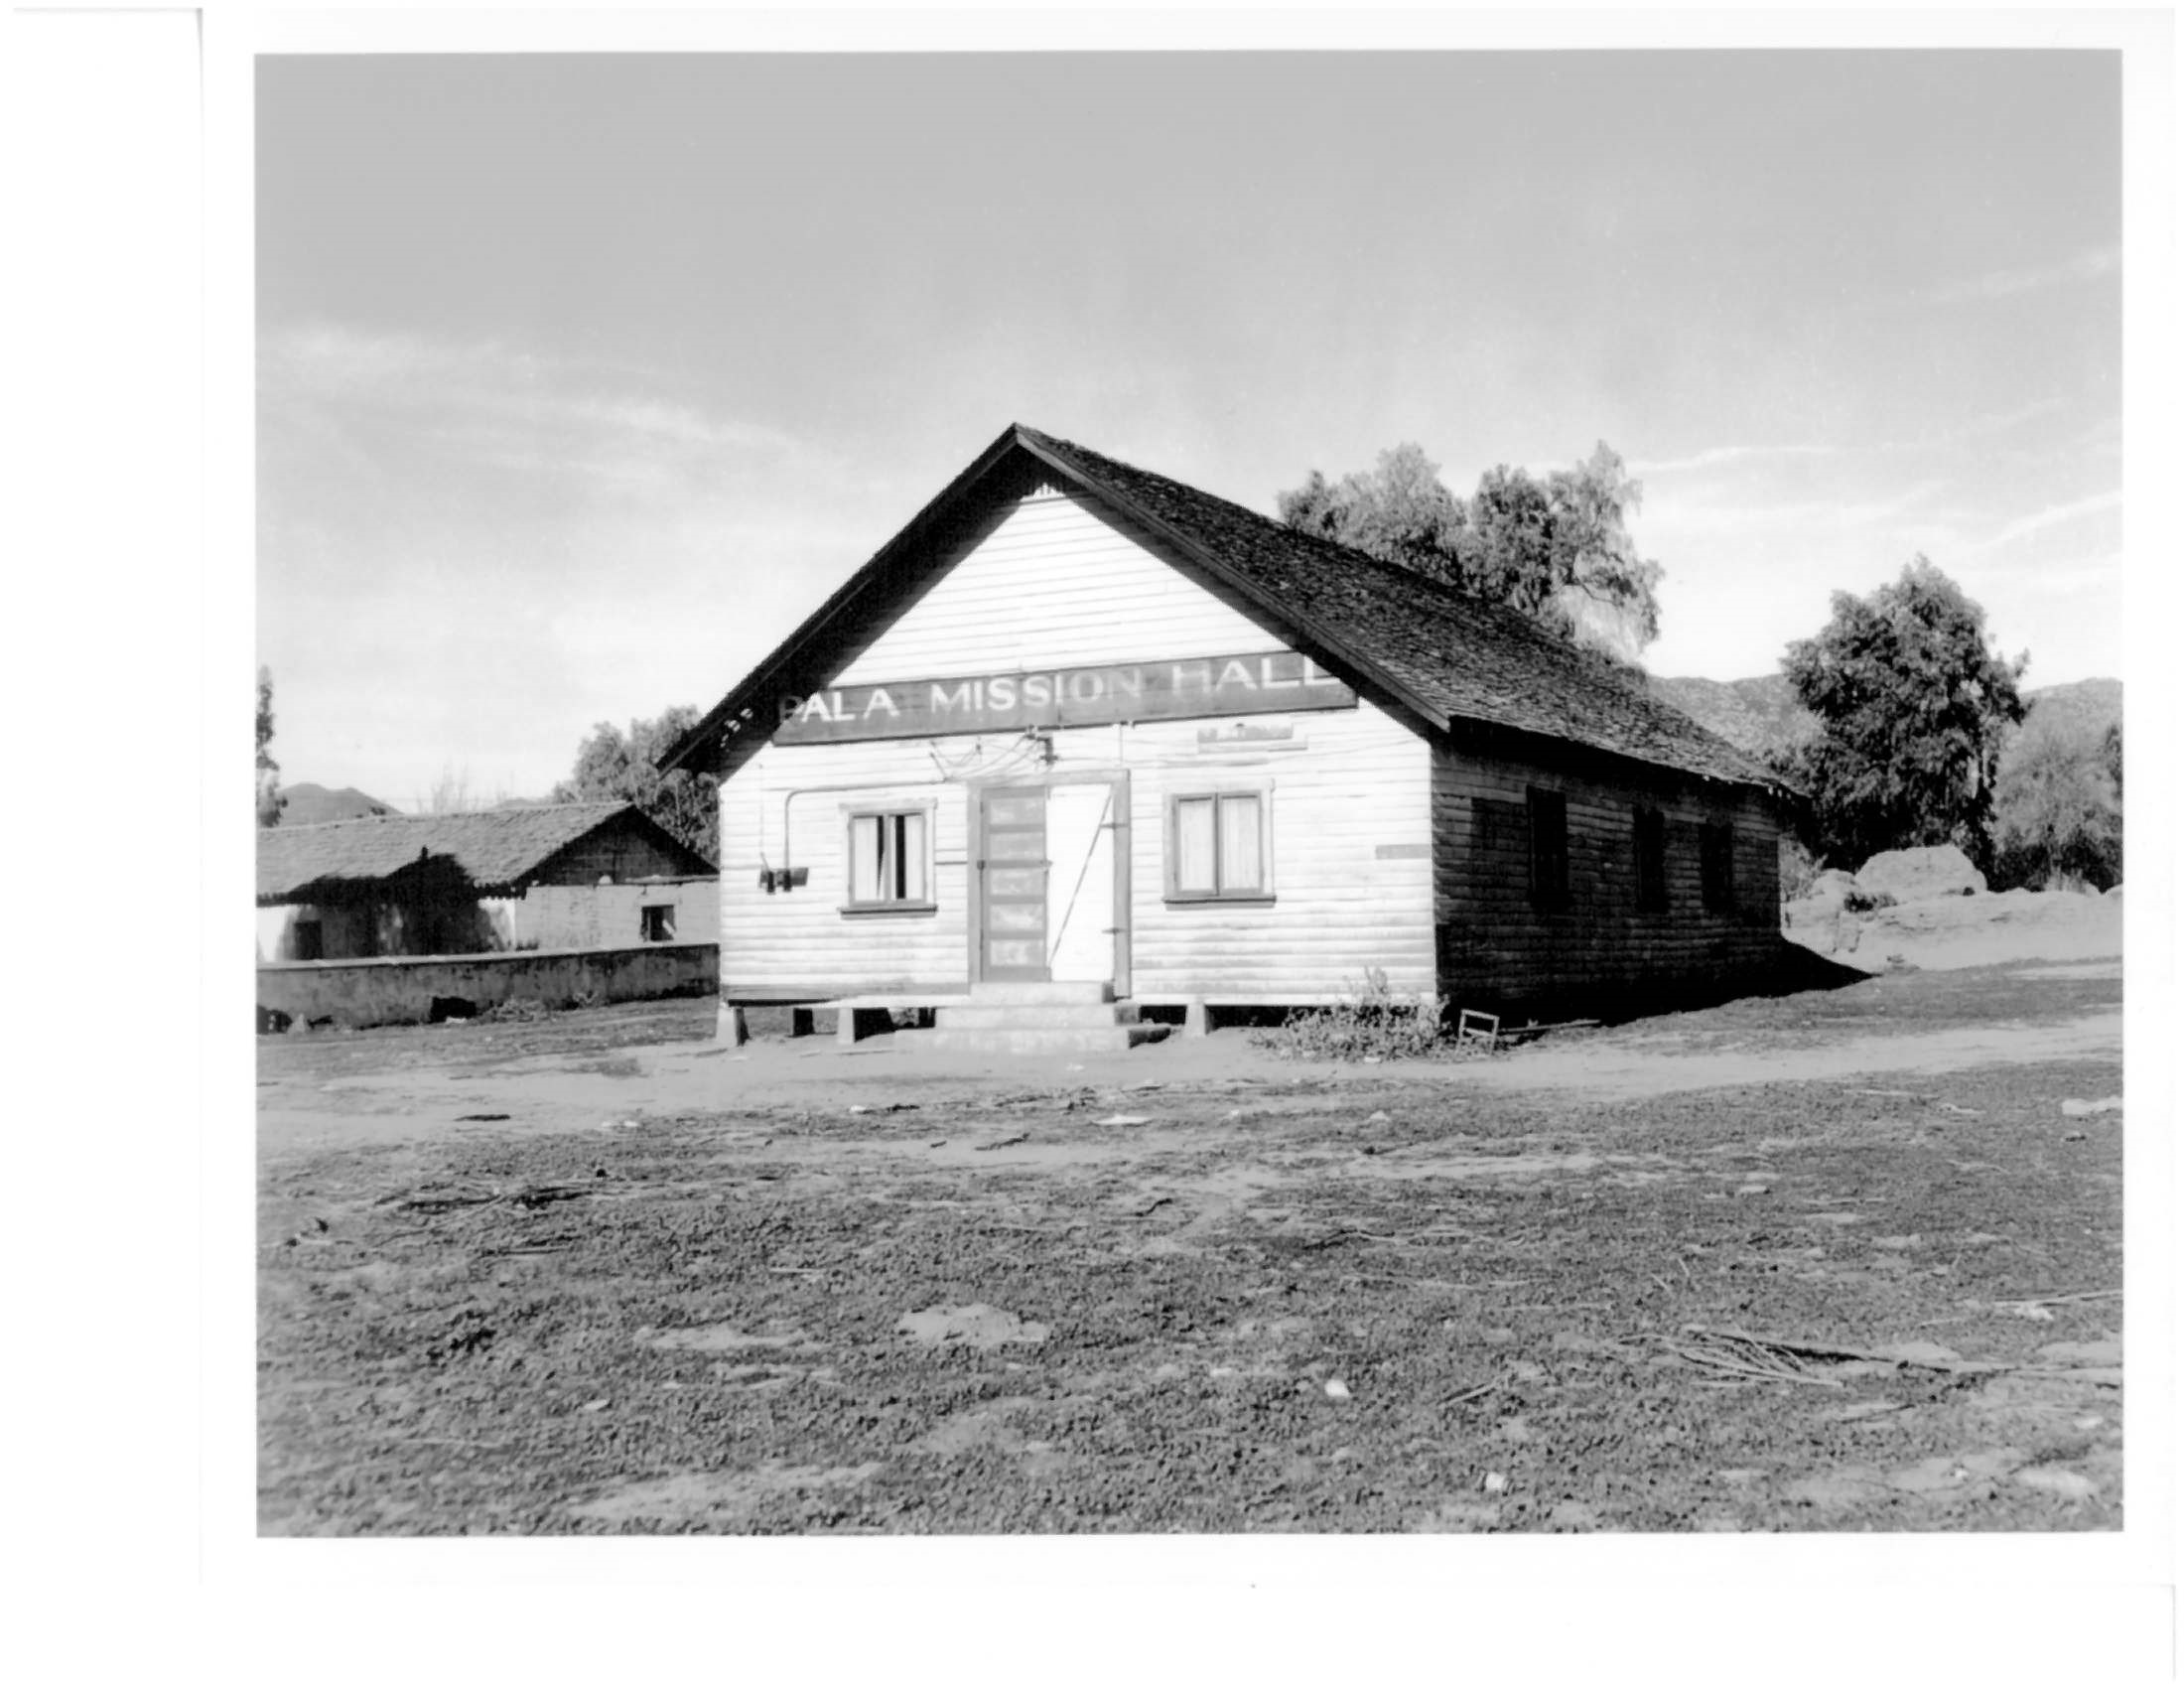 Old photograph of wooden building on piles with sign reading “Pala Mission Hall”